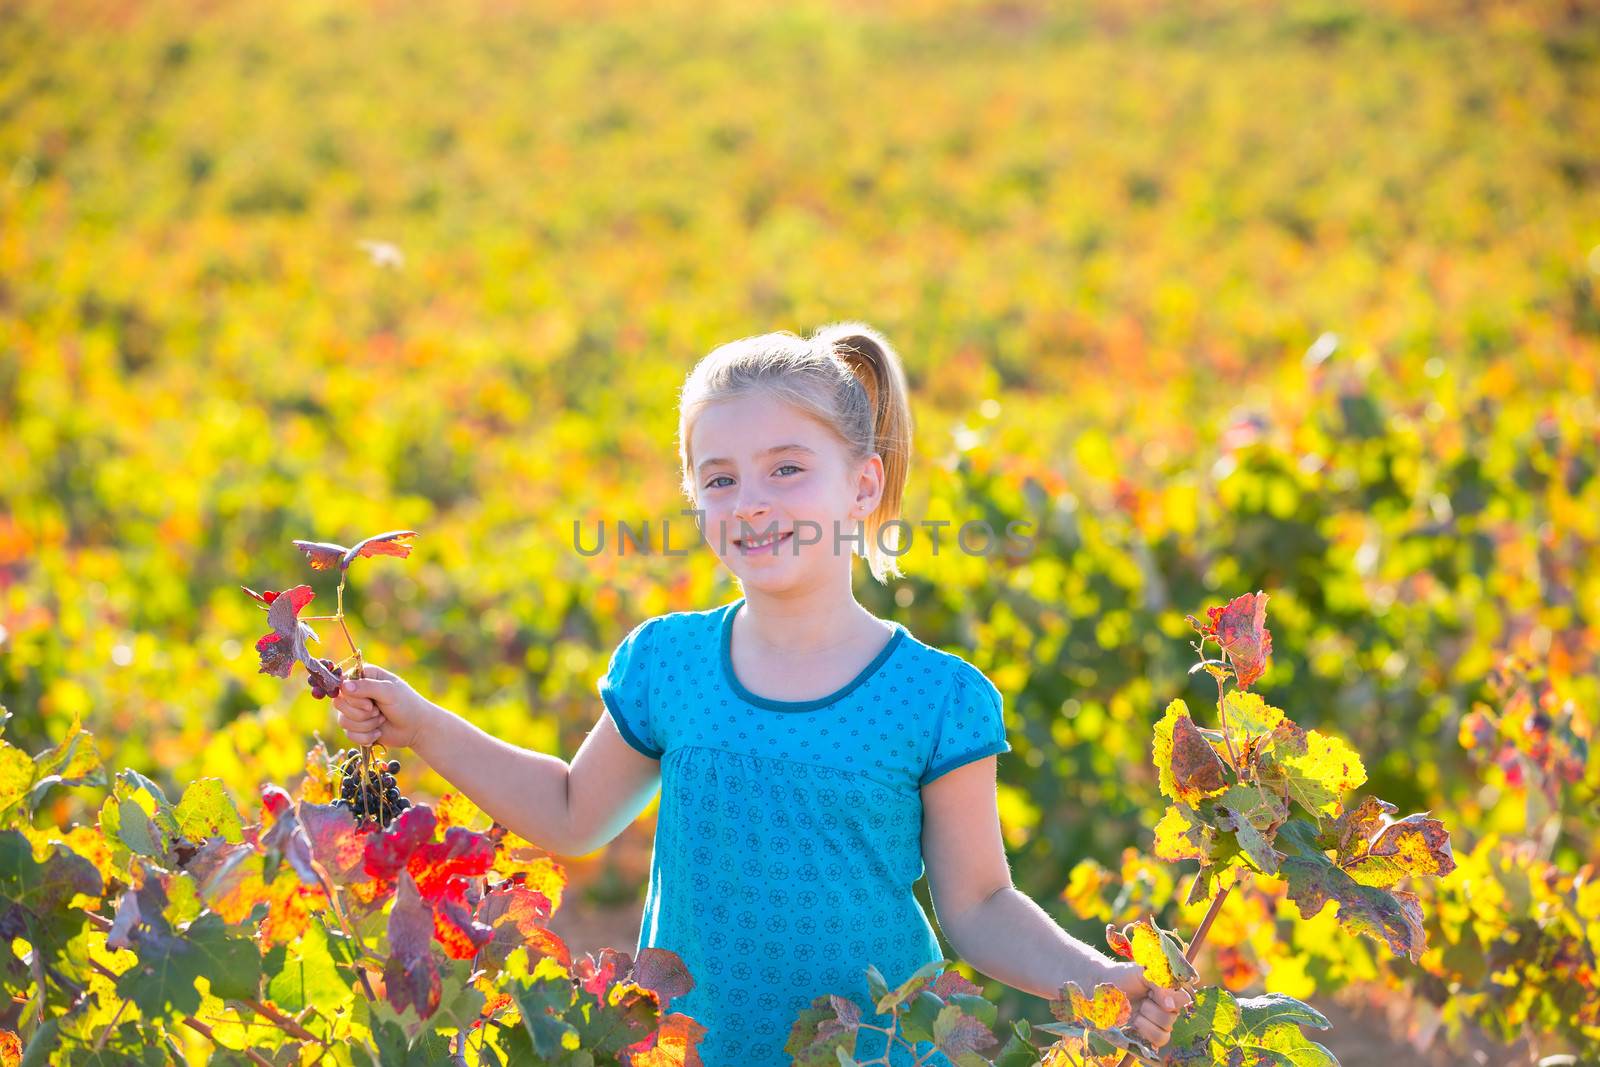 Blond Kid girl in happy autumn vineyard field holding red leaf grapes bunch in hand